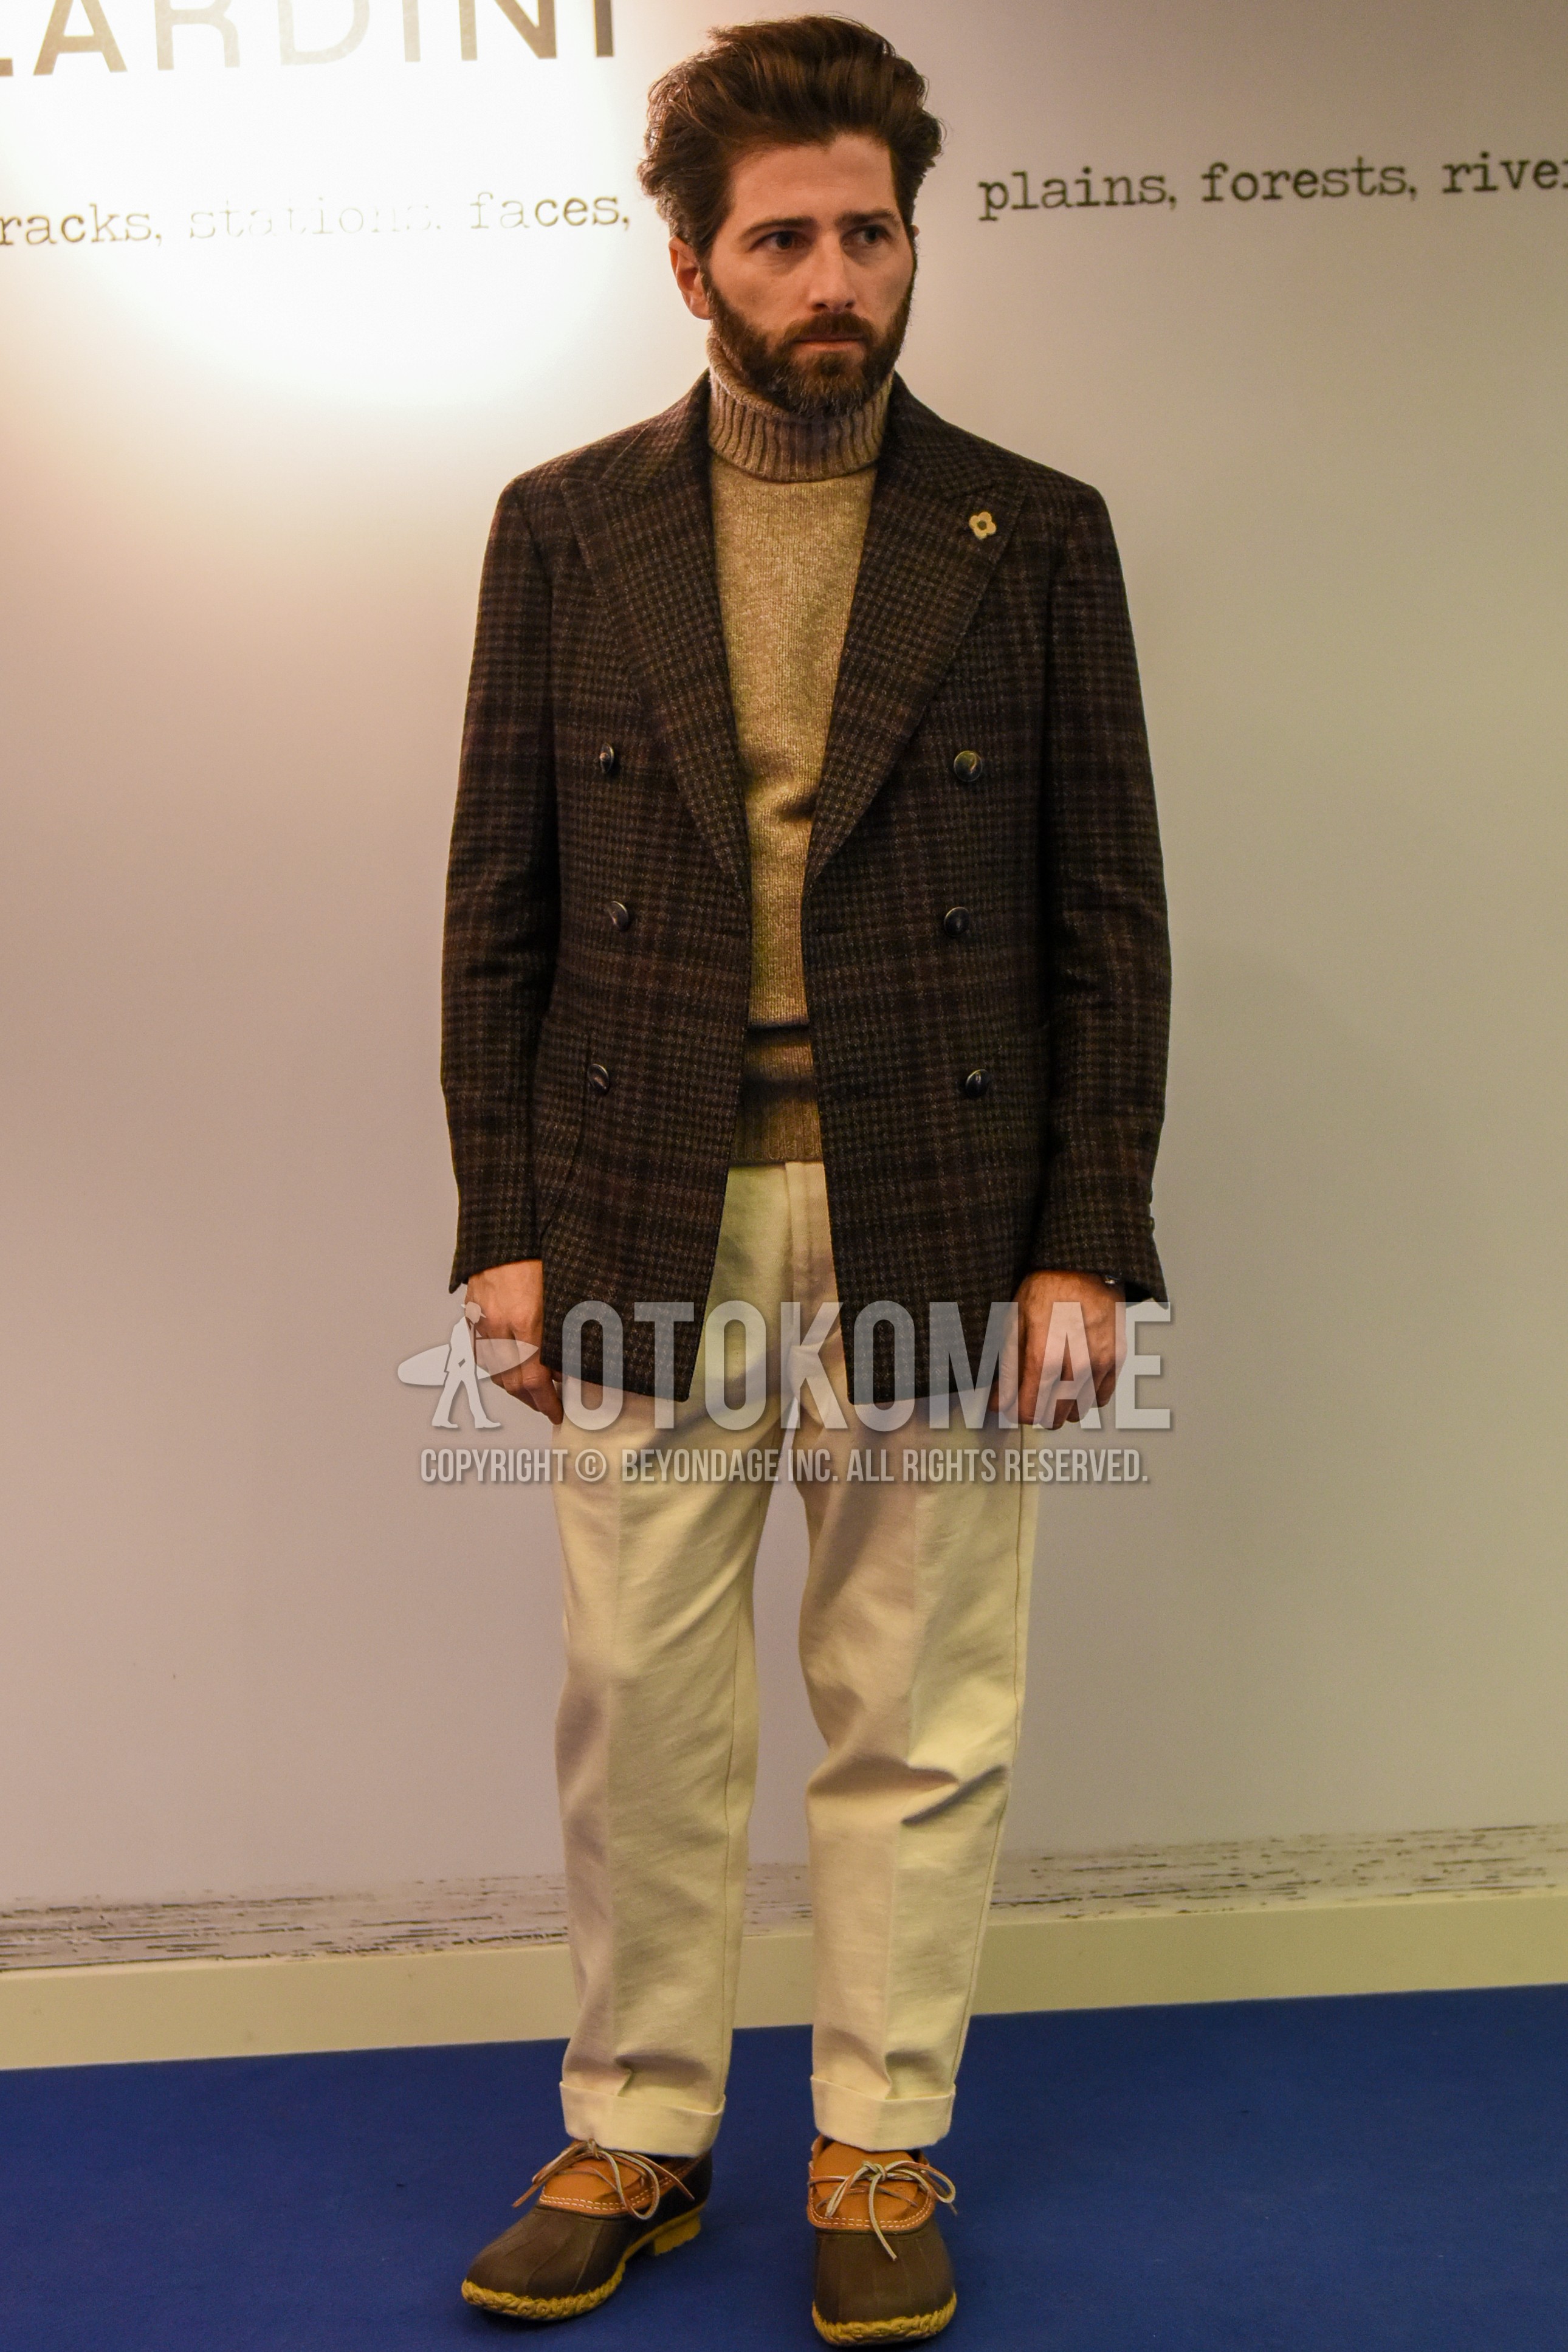 Men's spring autumn outfit with brown check tailored jacket, beige plain turtleneck knit, white plain cotton pants, brown beige  leather shoes.